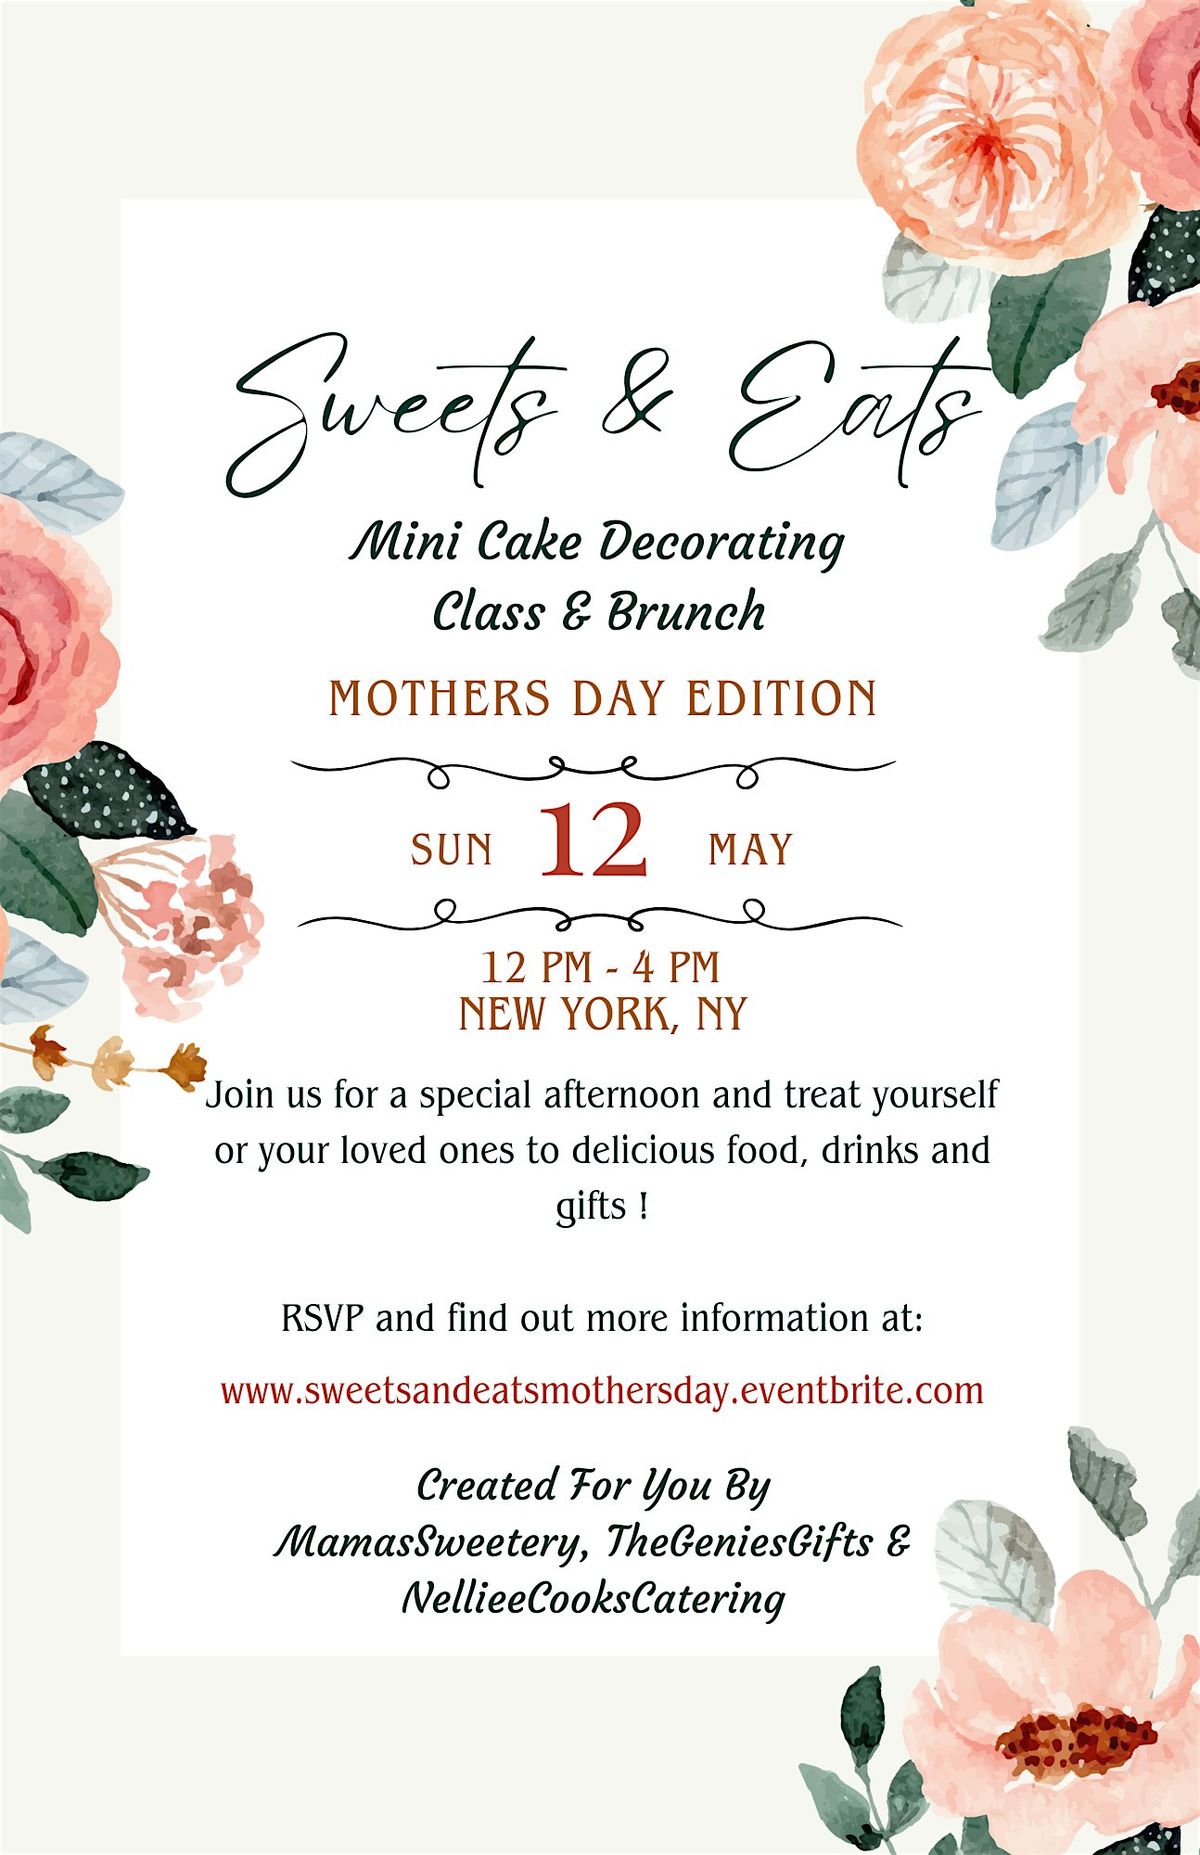 Sweets & Eats - Mothers Day Edition